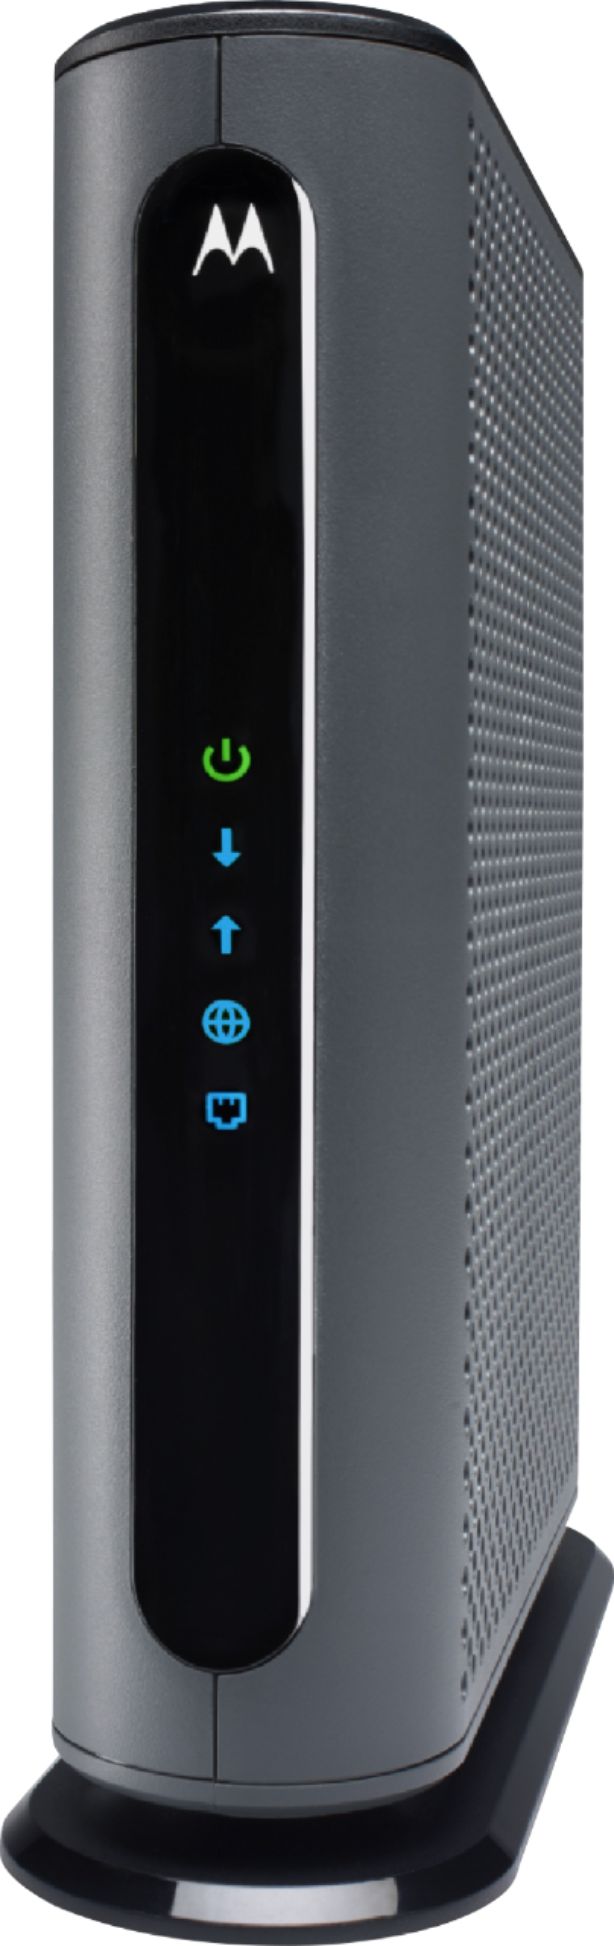 Angle View: Motorola - MB7420 16x4 DOCSIS 3.0 Cable Modem 646 Mbps - Gray